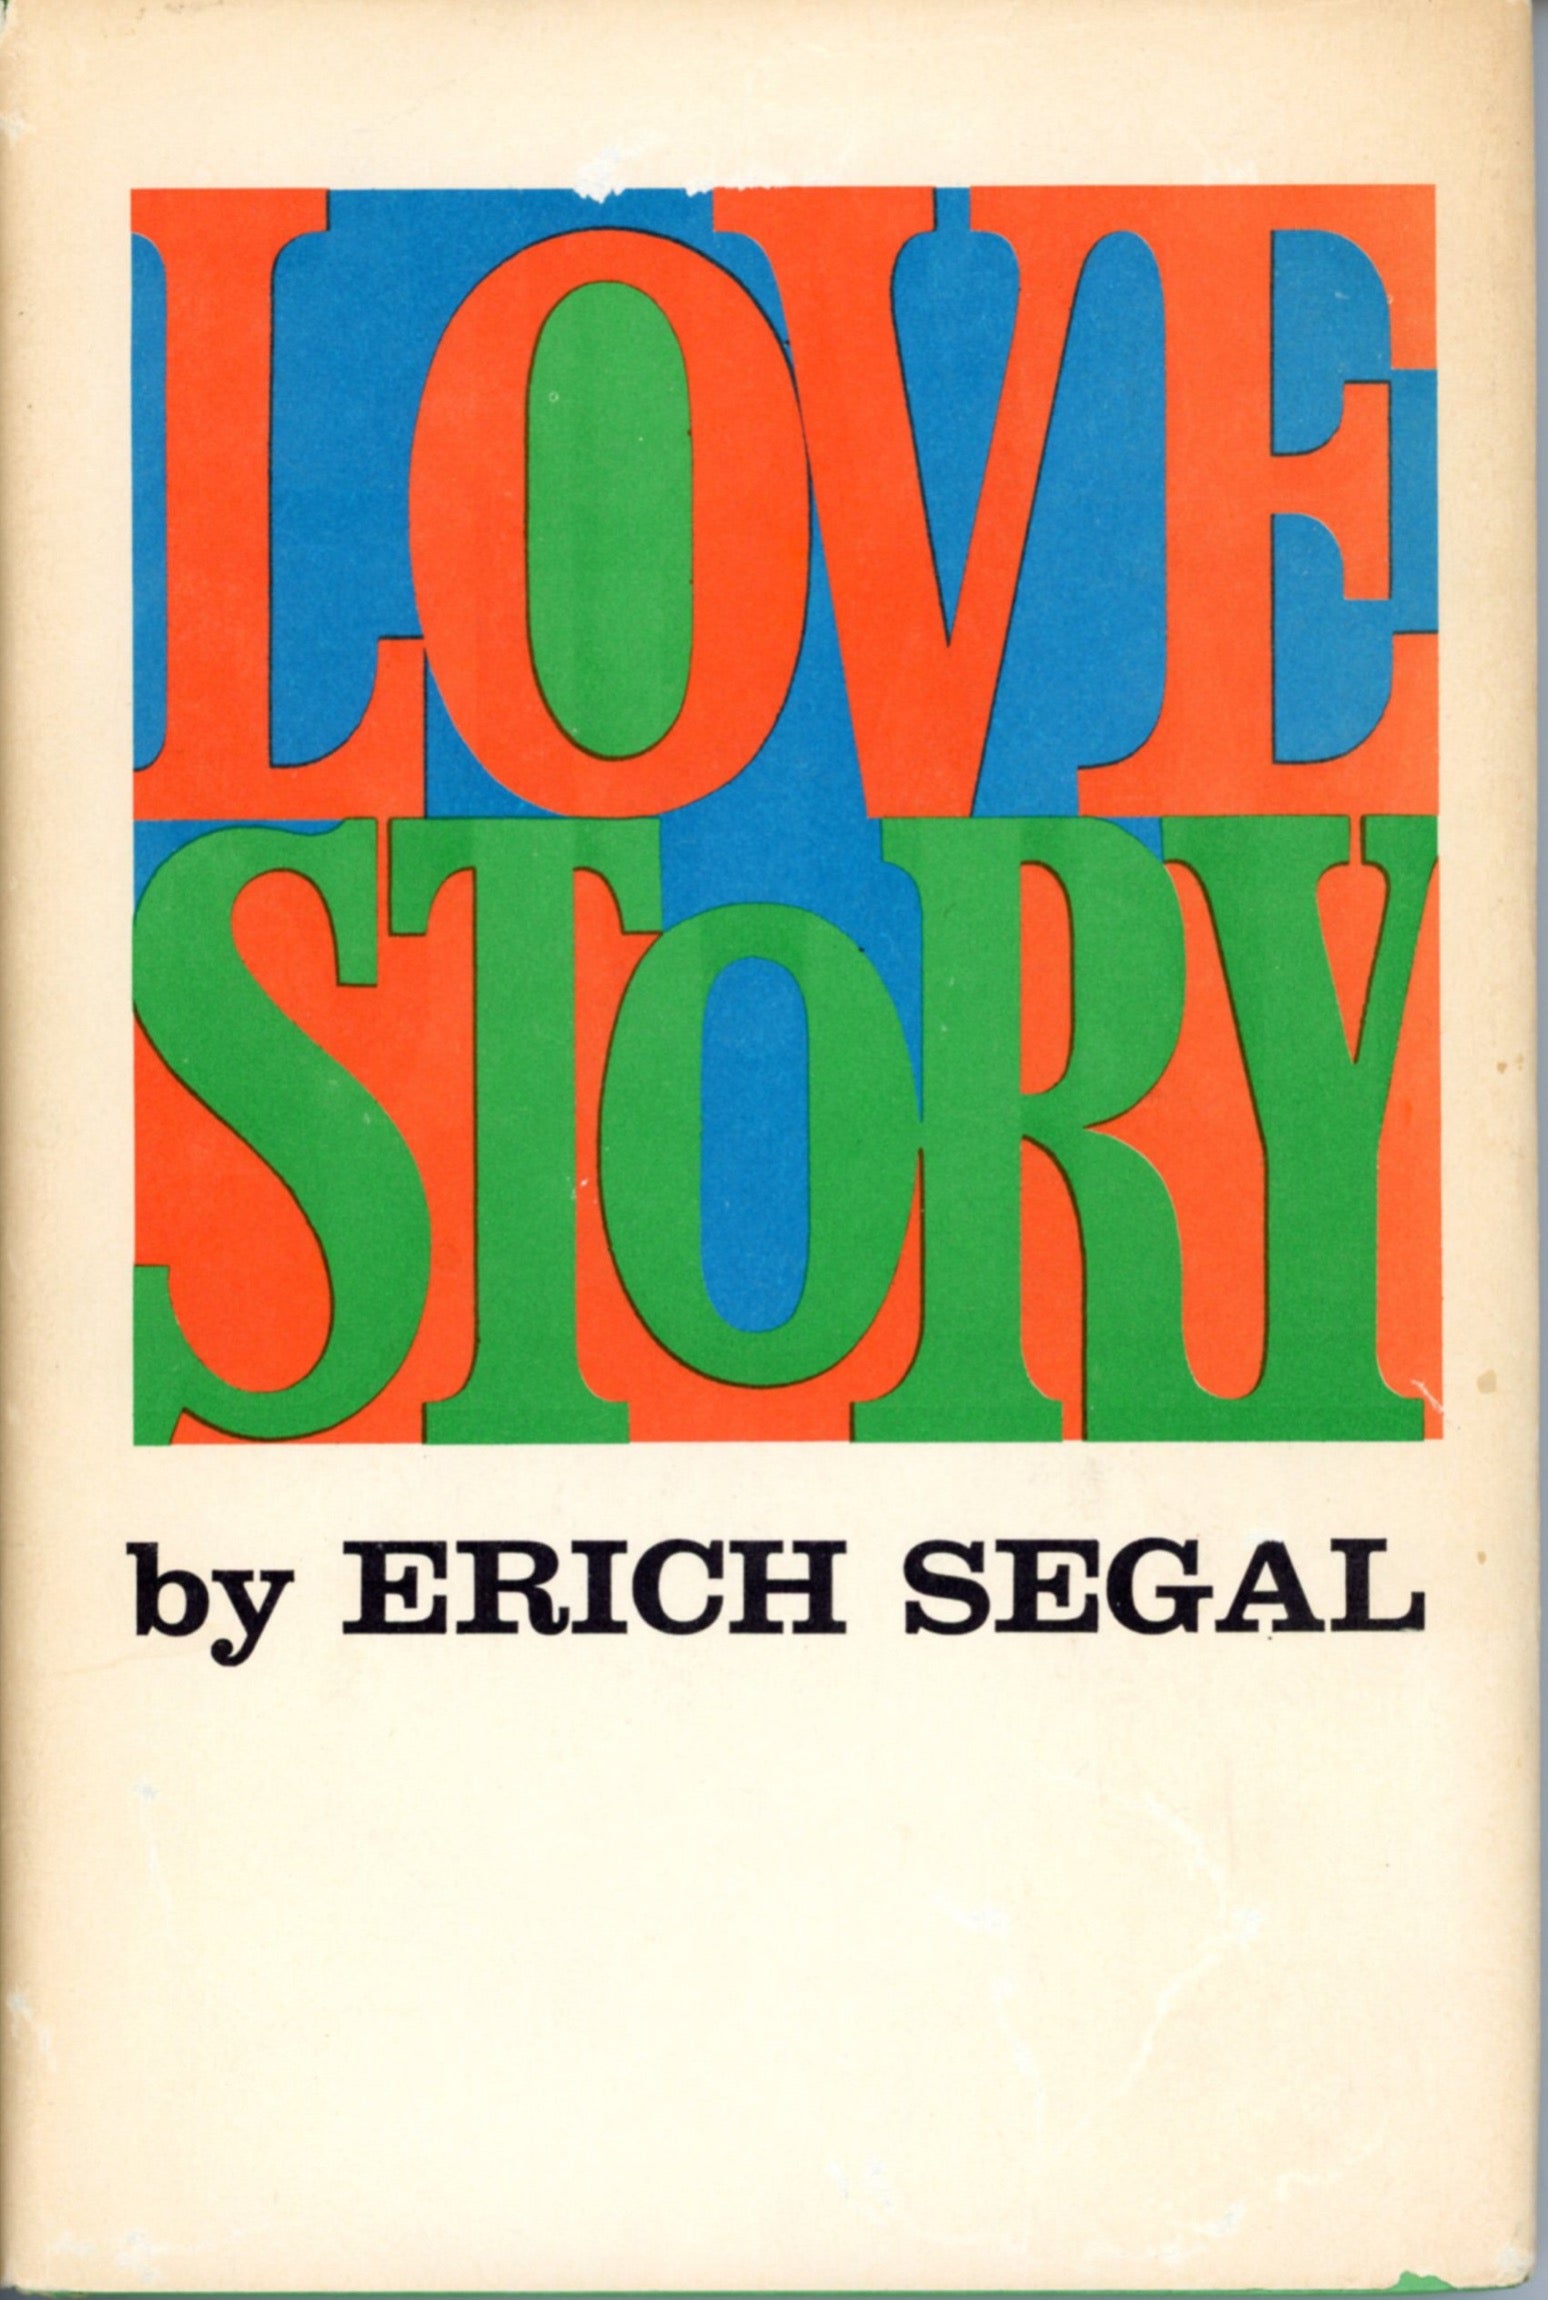 LOVE STORY by Erich Segal Published by Harper & Row New York ©1970